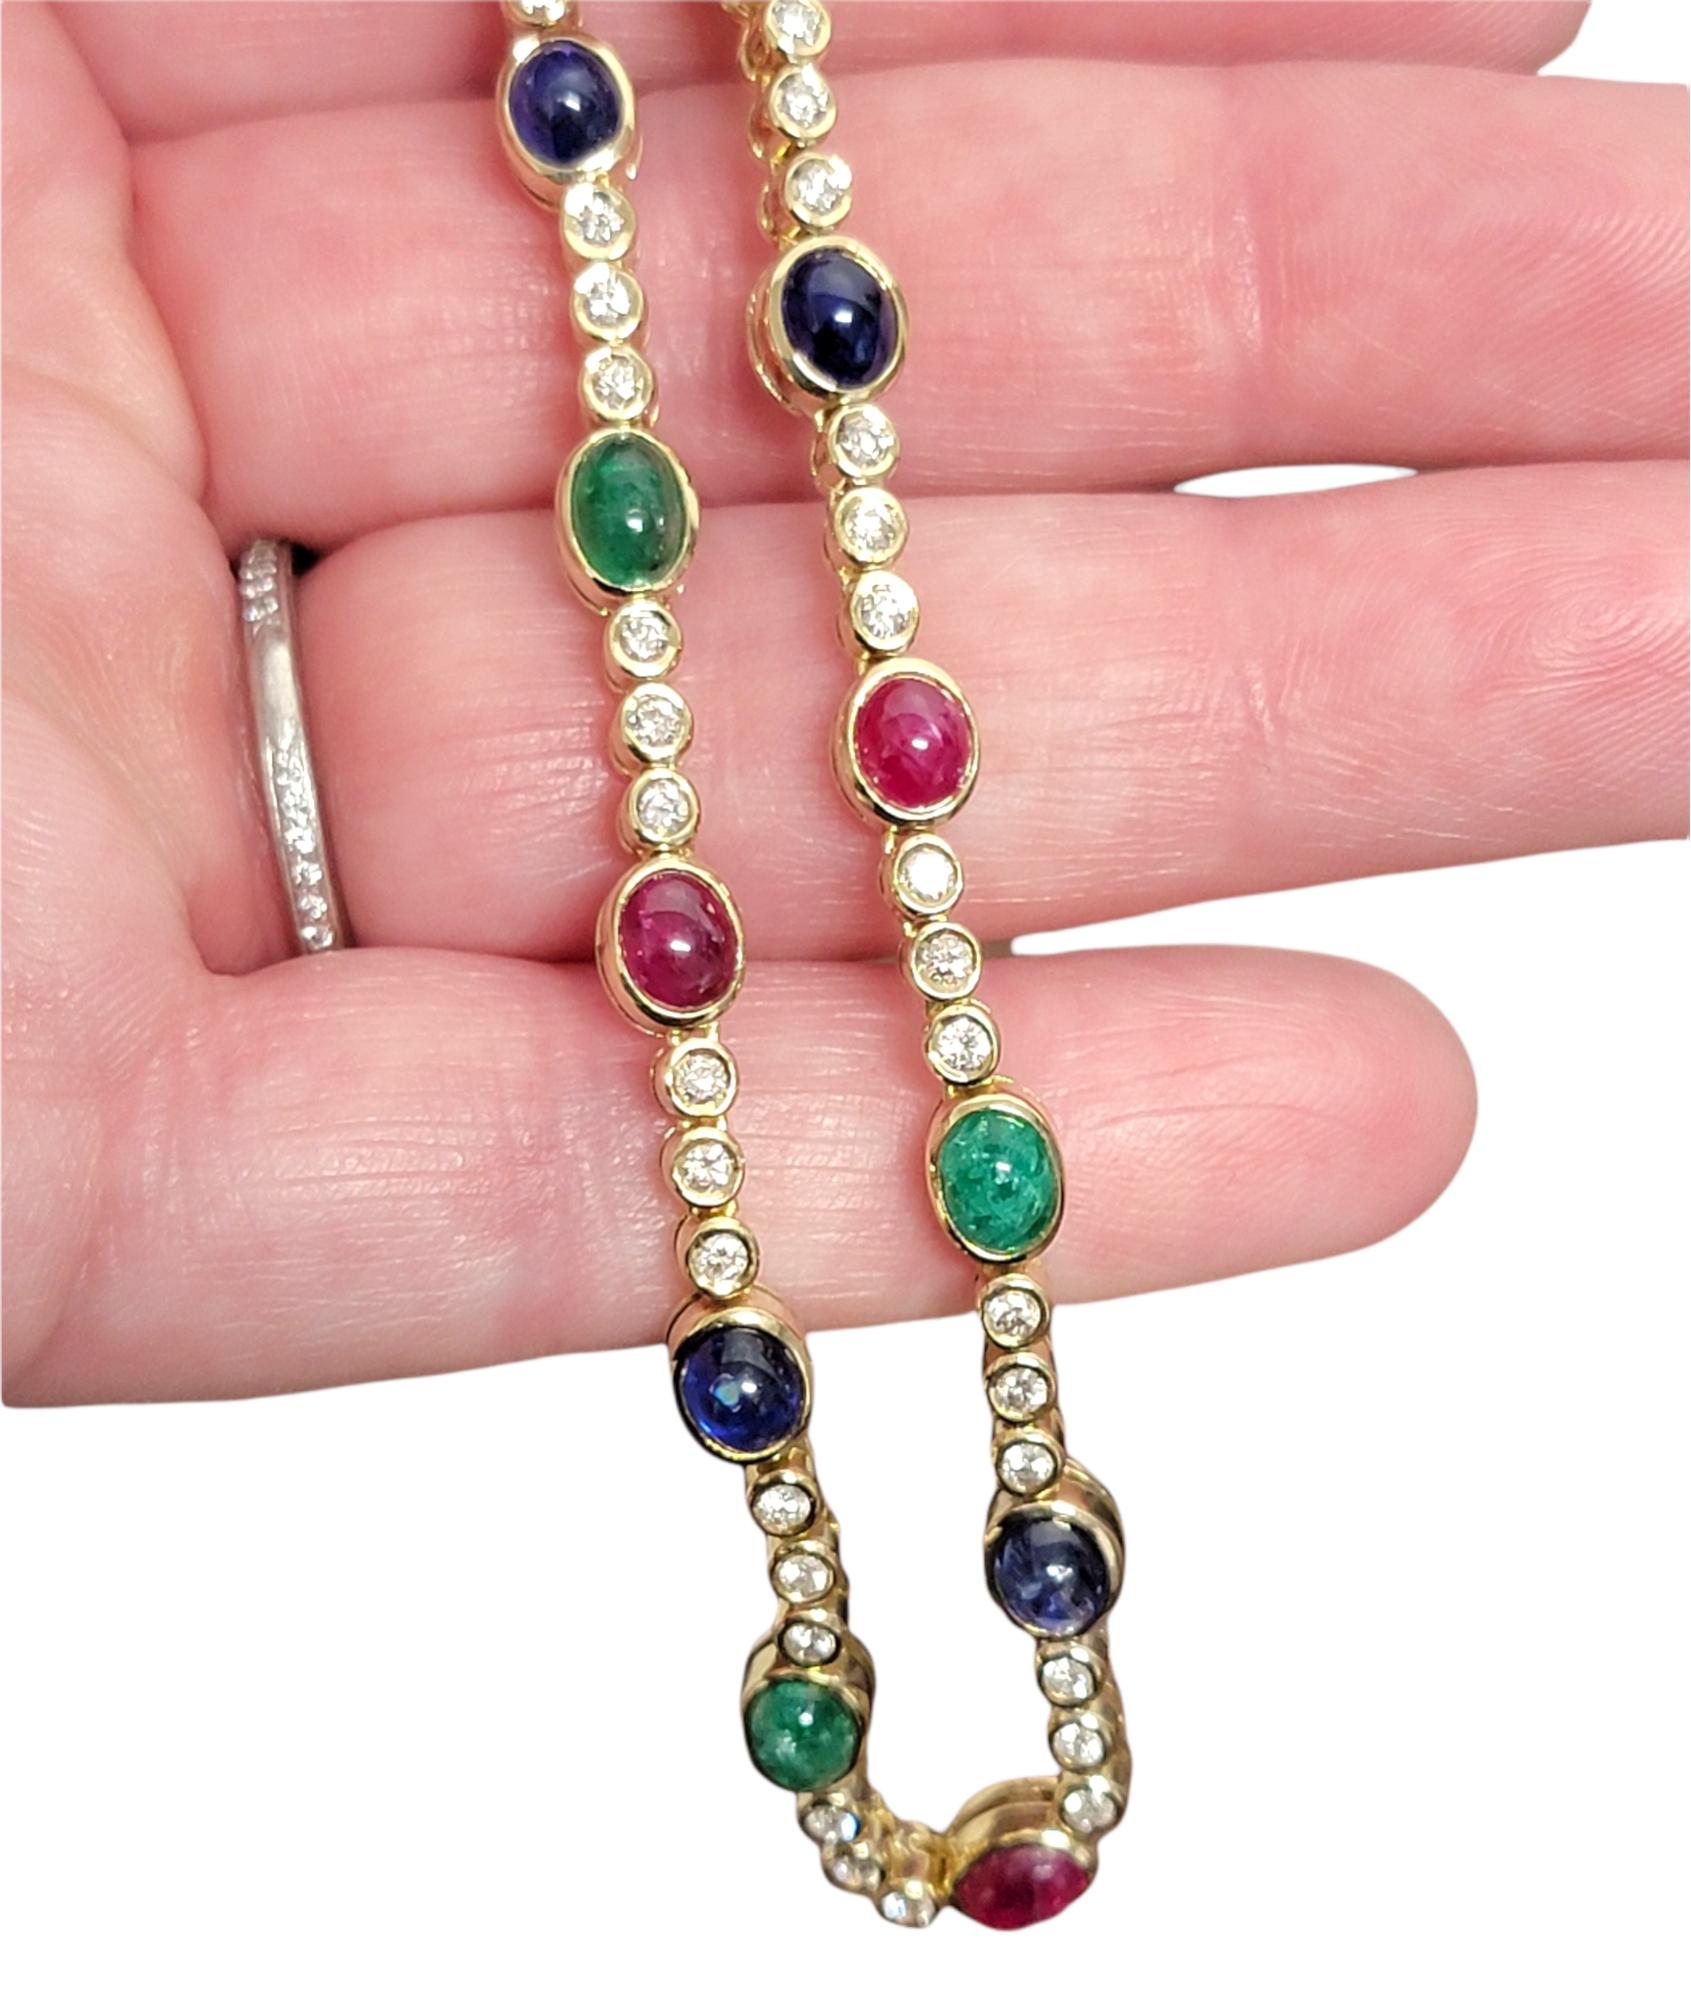 Women's 22.05 Carats Total Ruby, Emerald, Sapphire and Diamond Station Choker Necklace